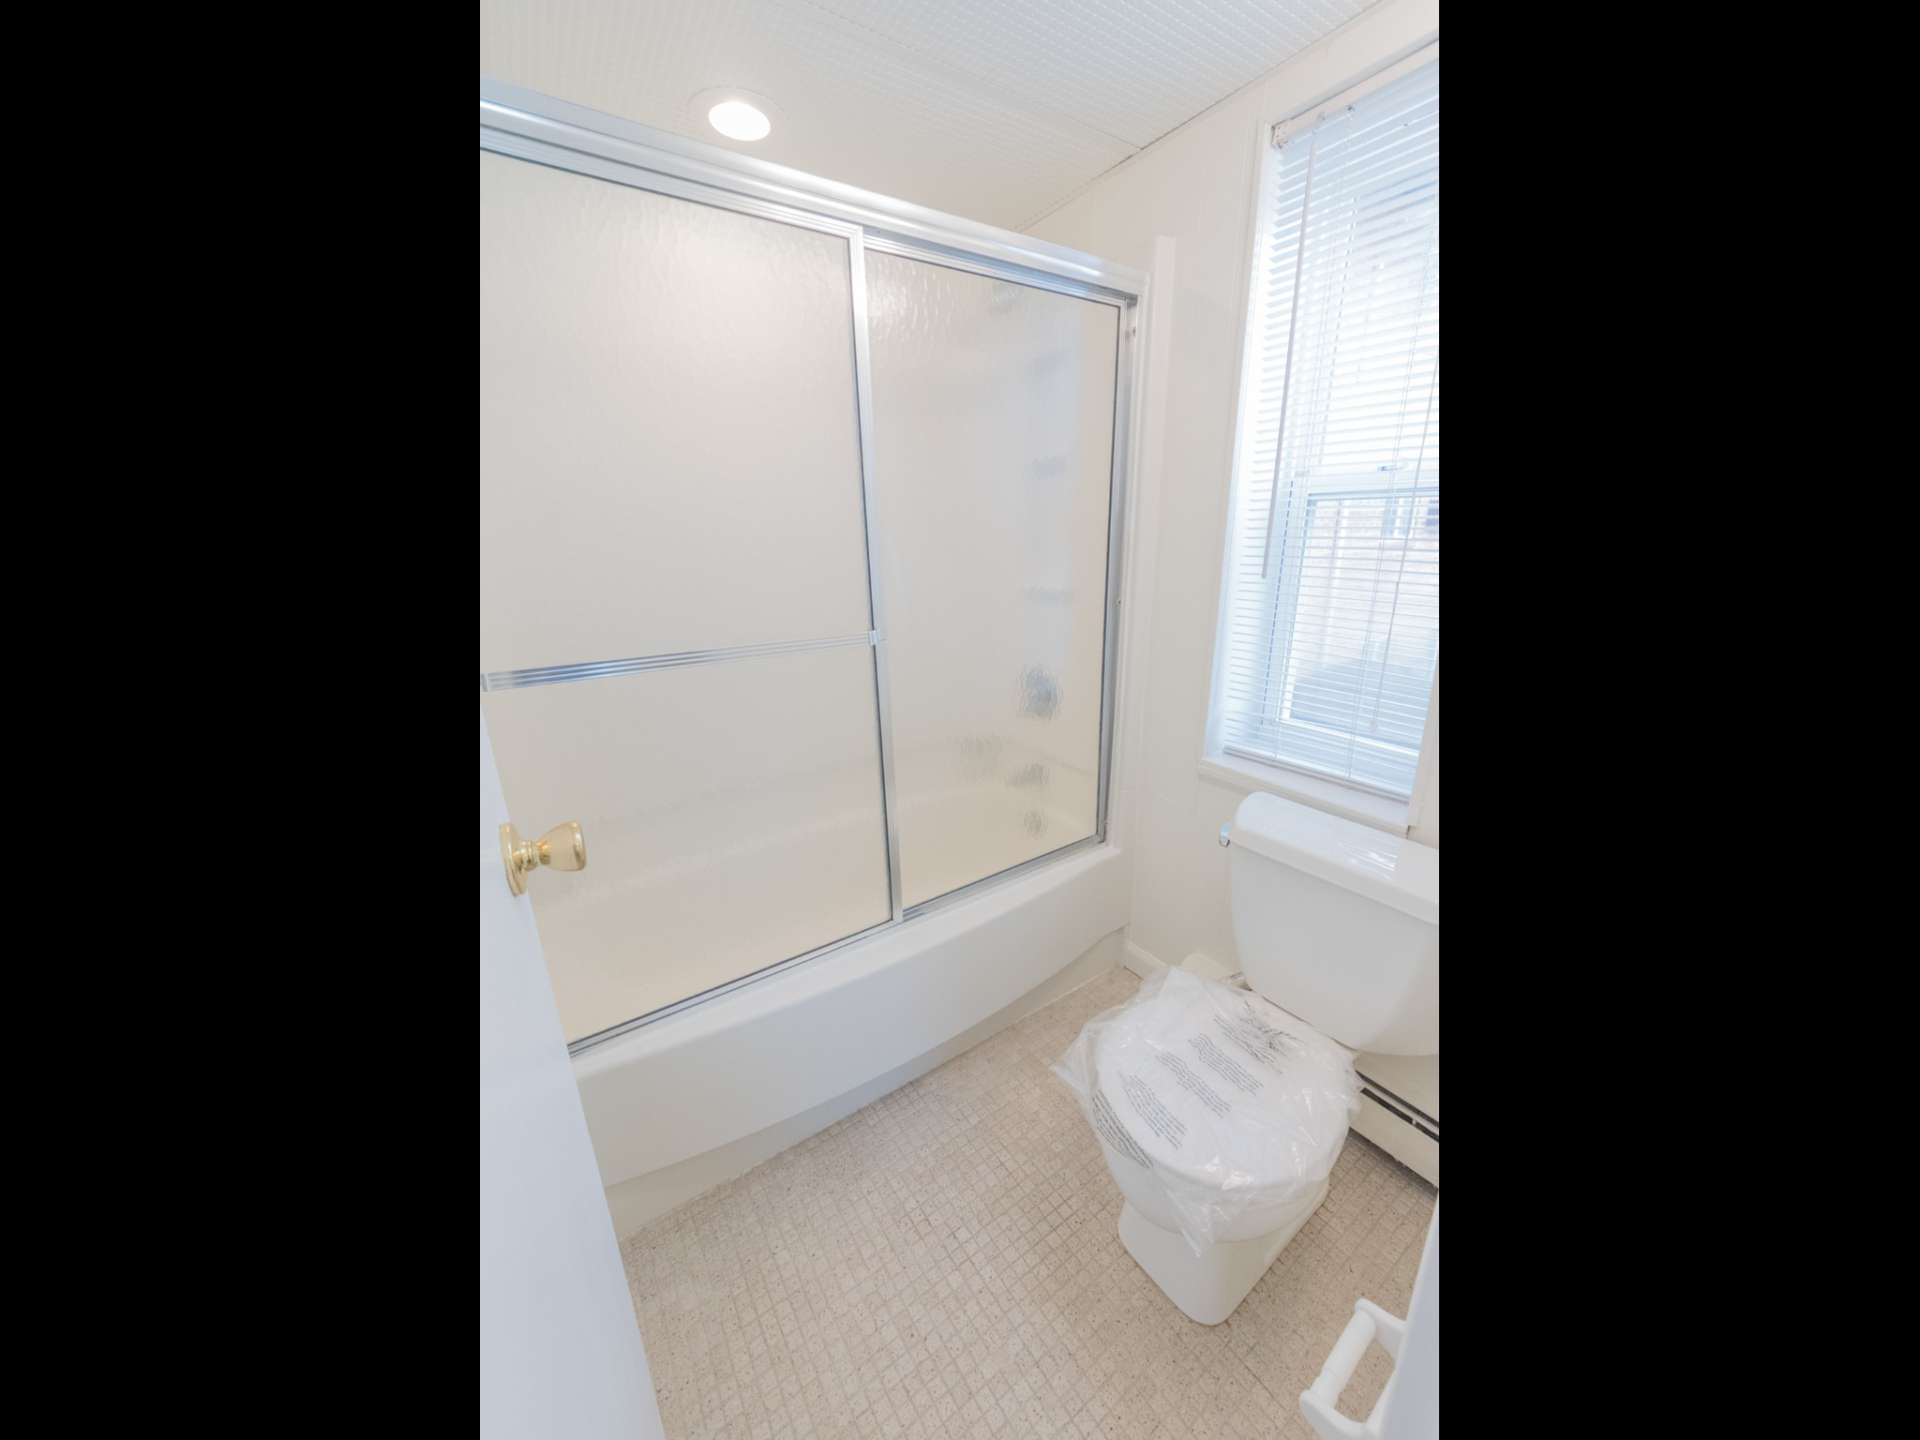 Bathroom with a toilet and bathtub shower with sliding glass doors.